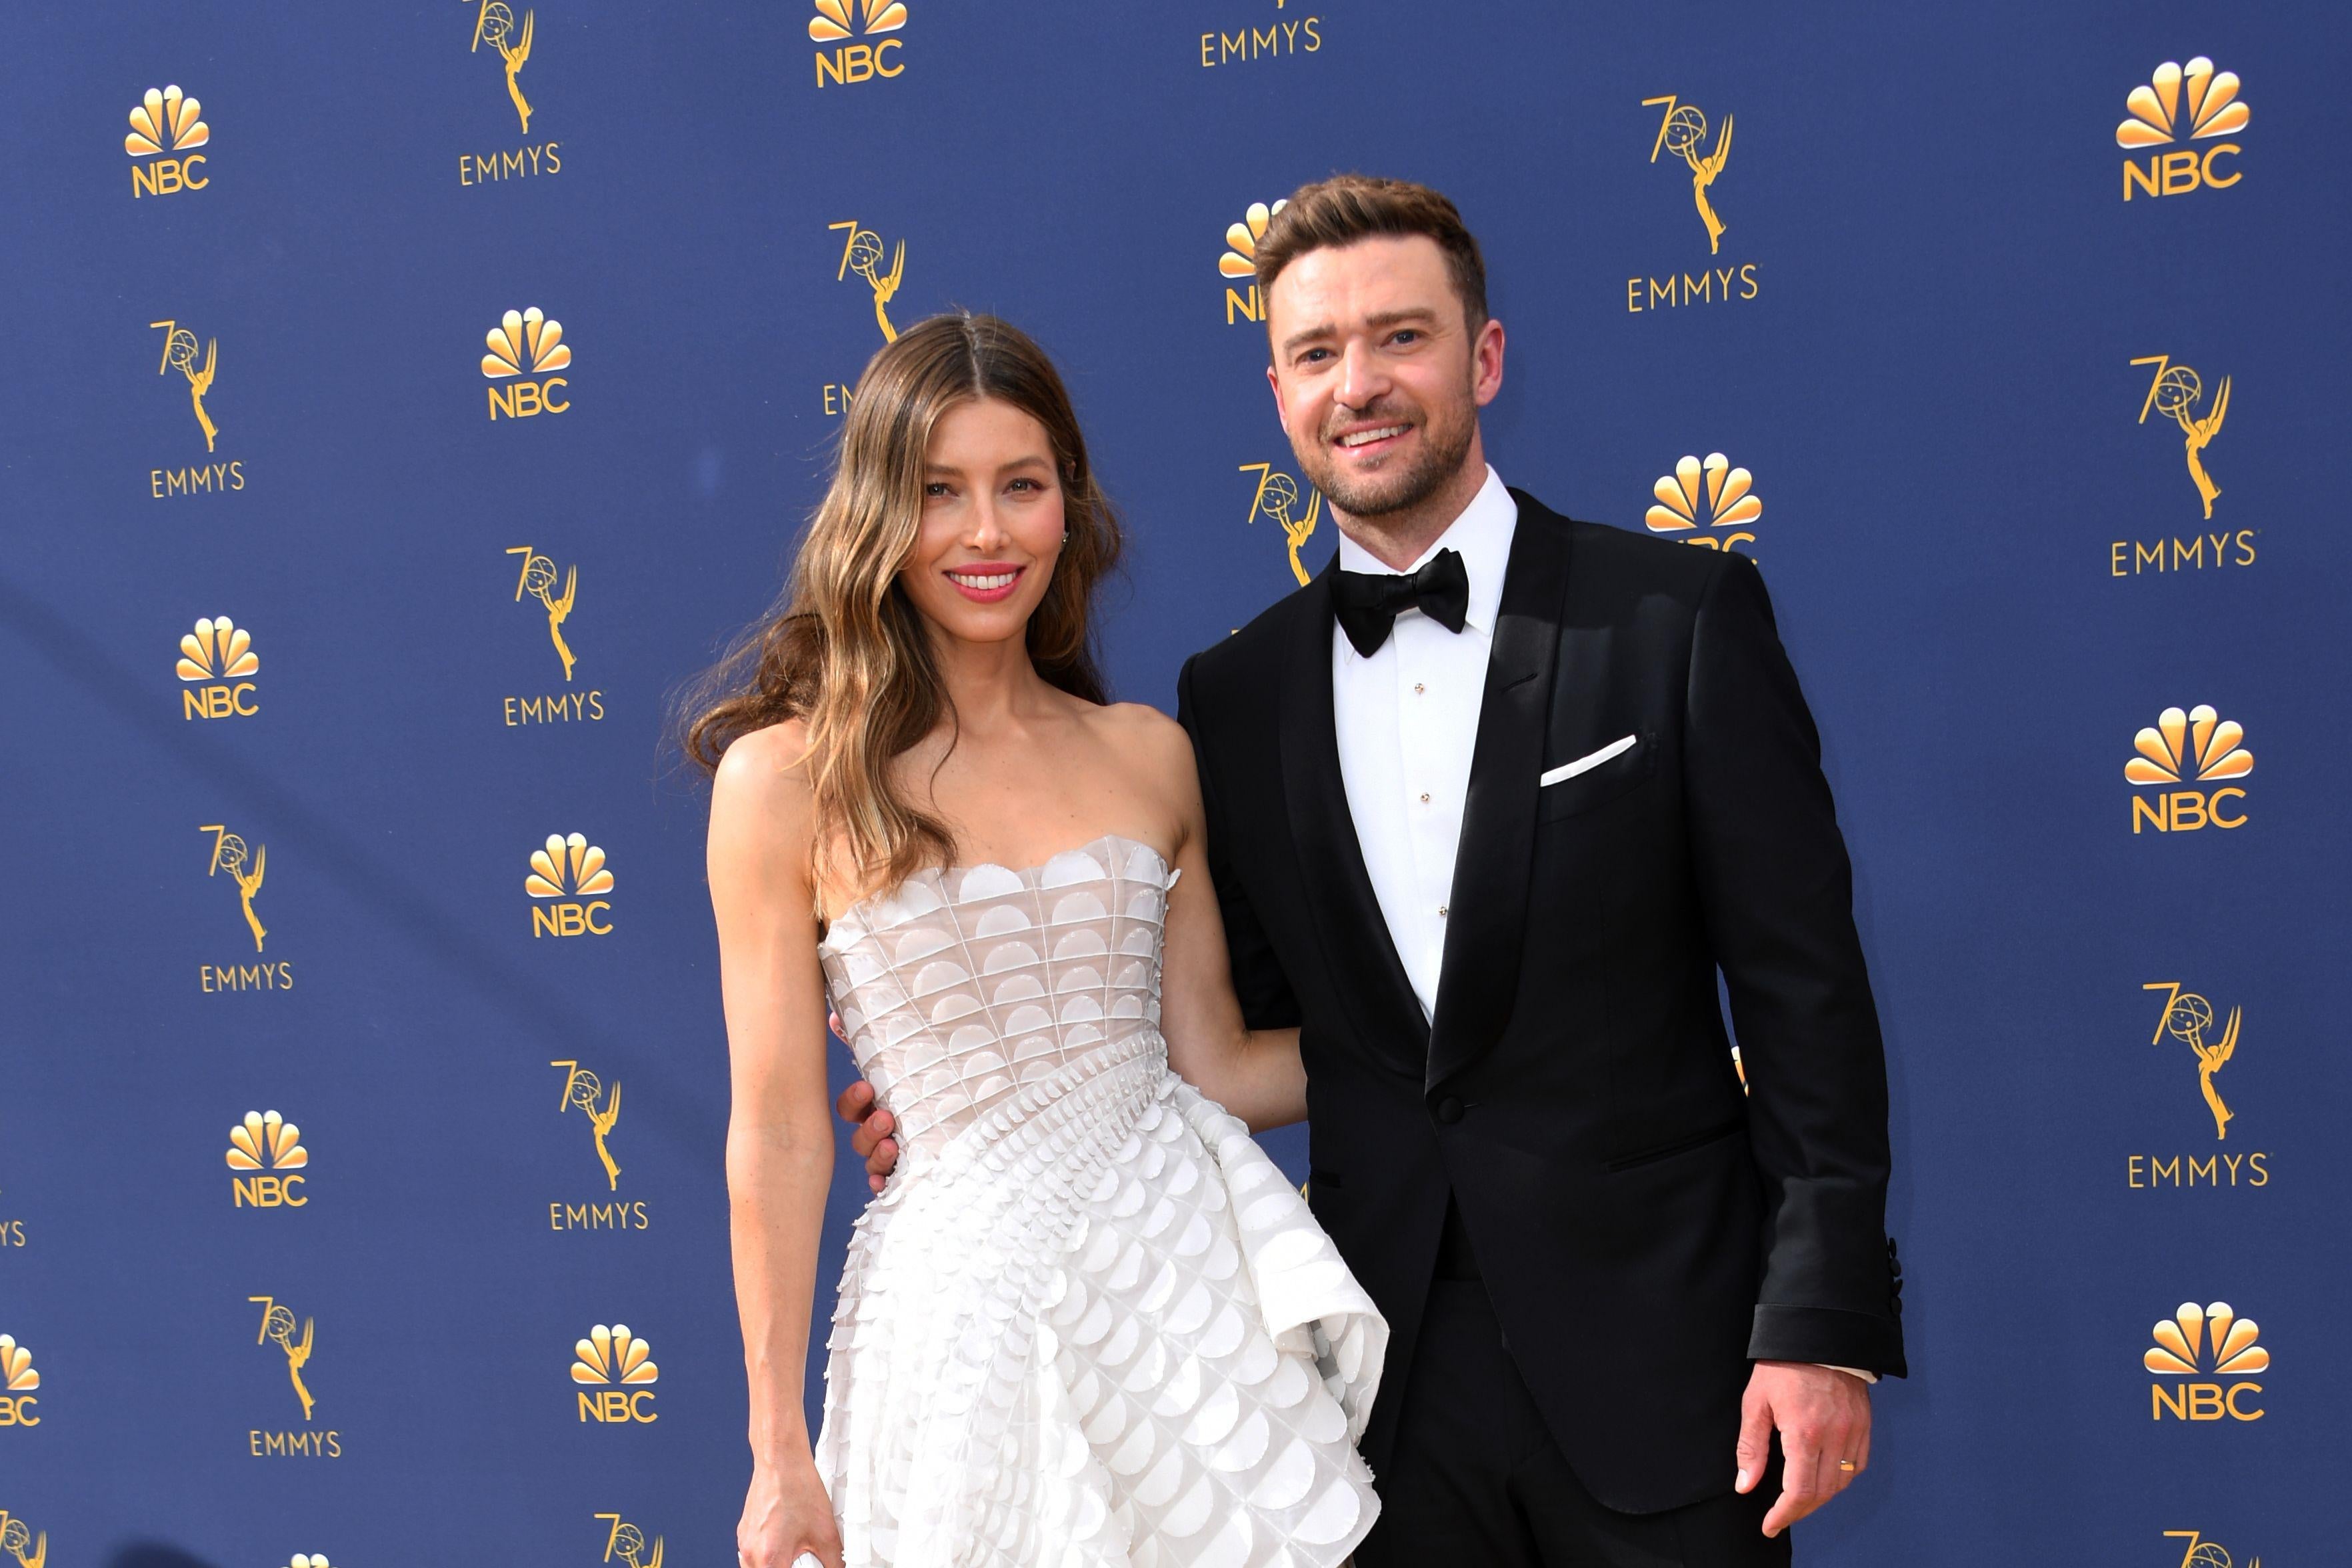 Jessica Biel and husband Justin Timberlake arrive for the 70th Emmy Awards.